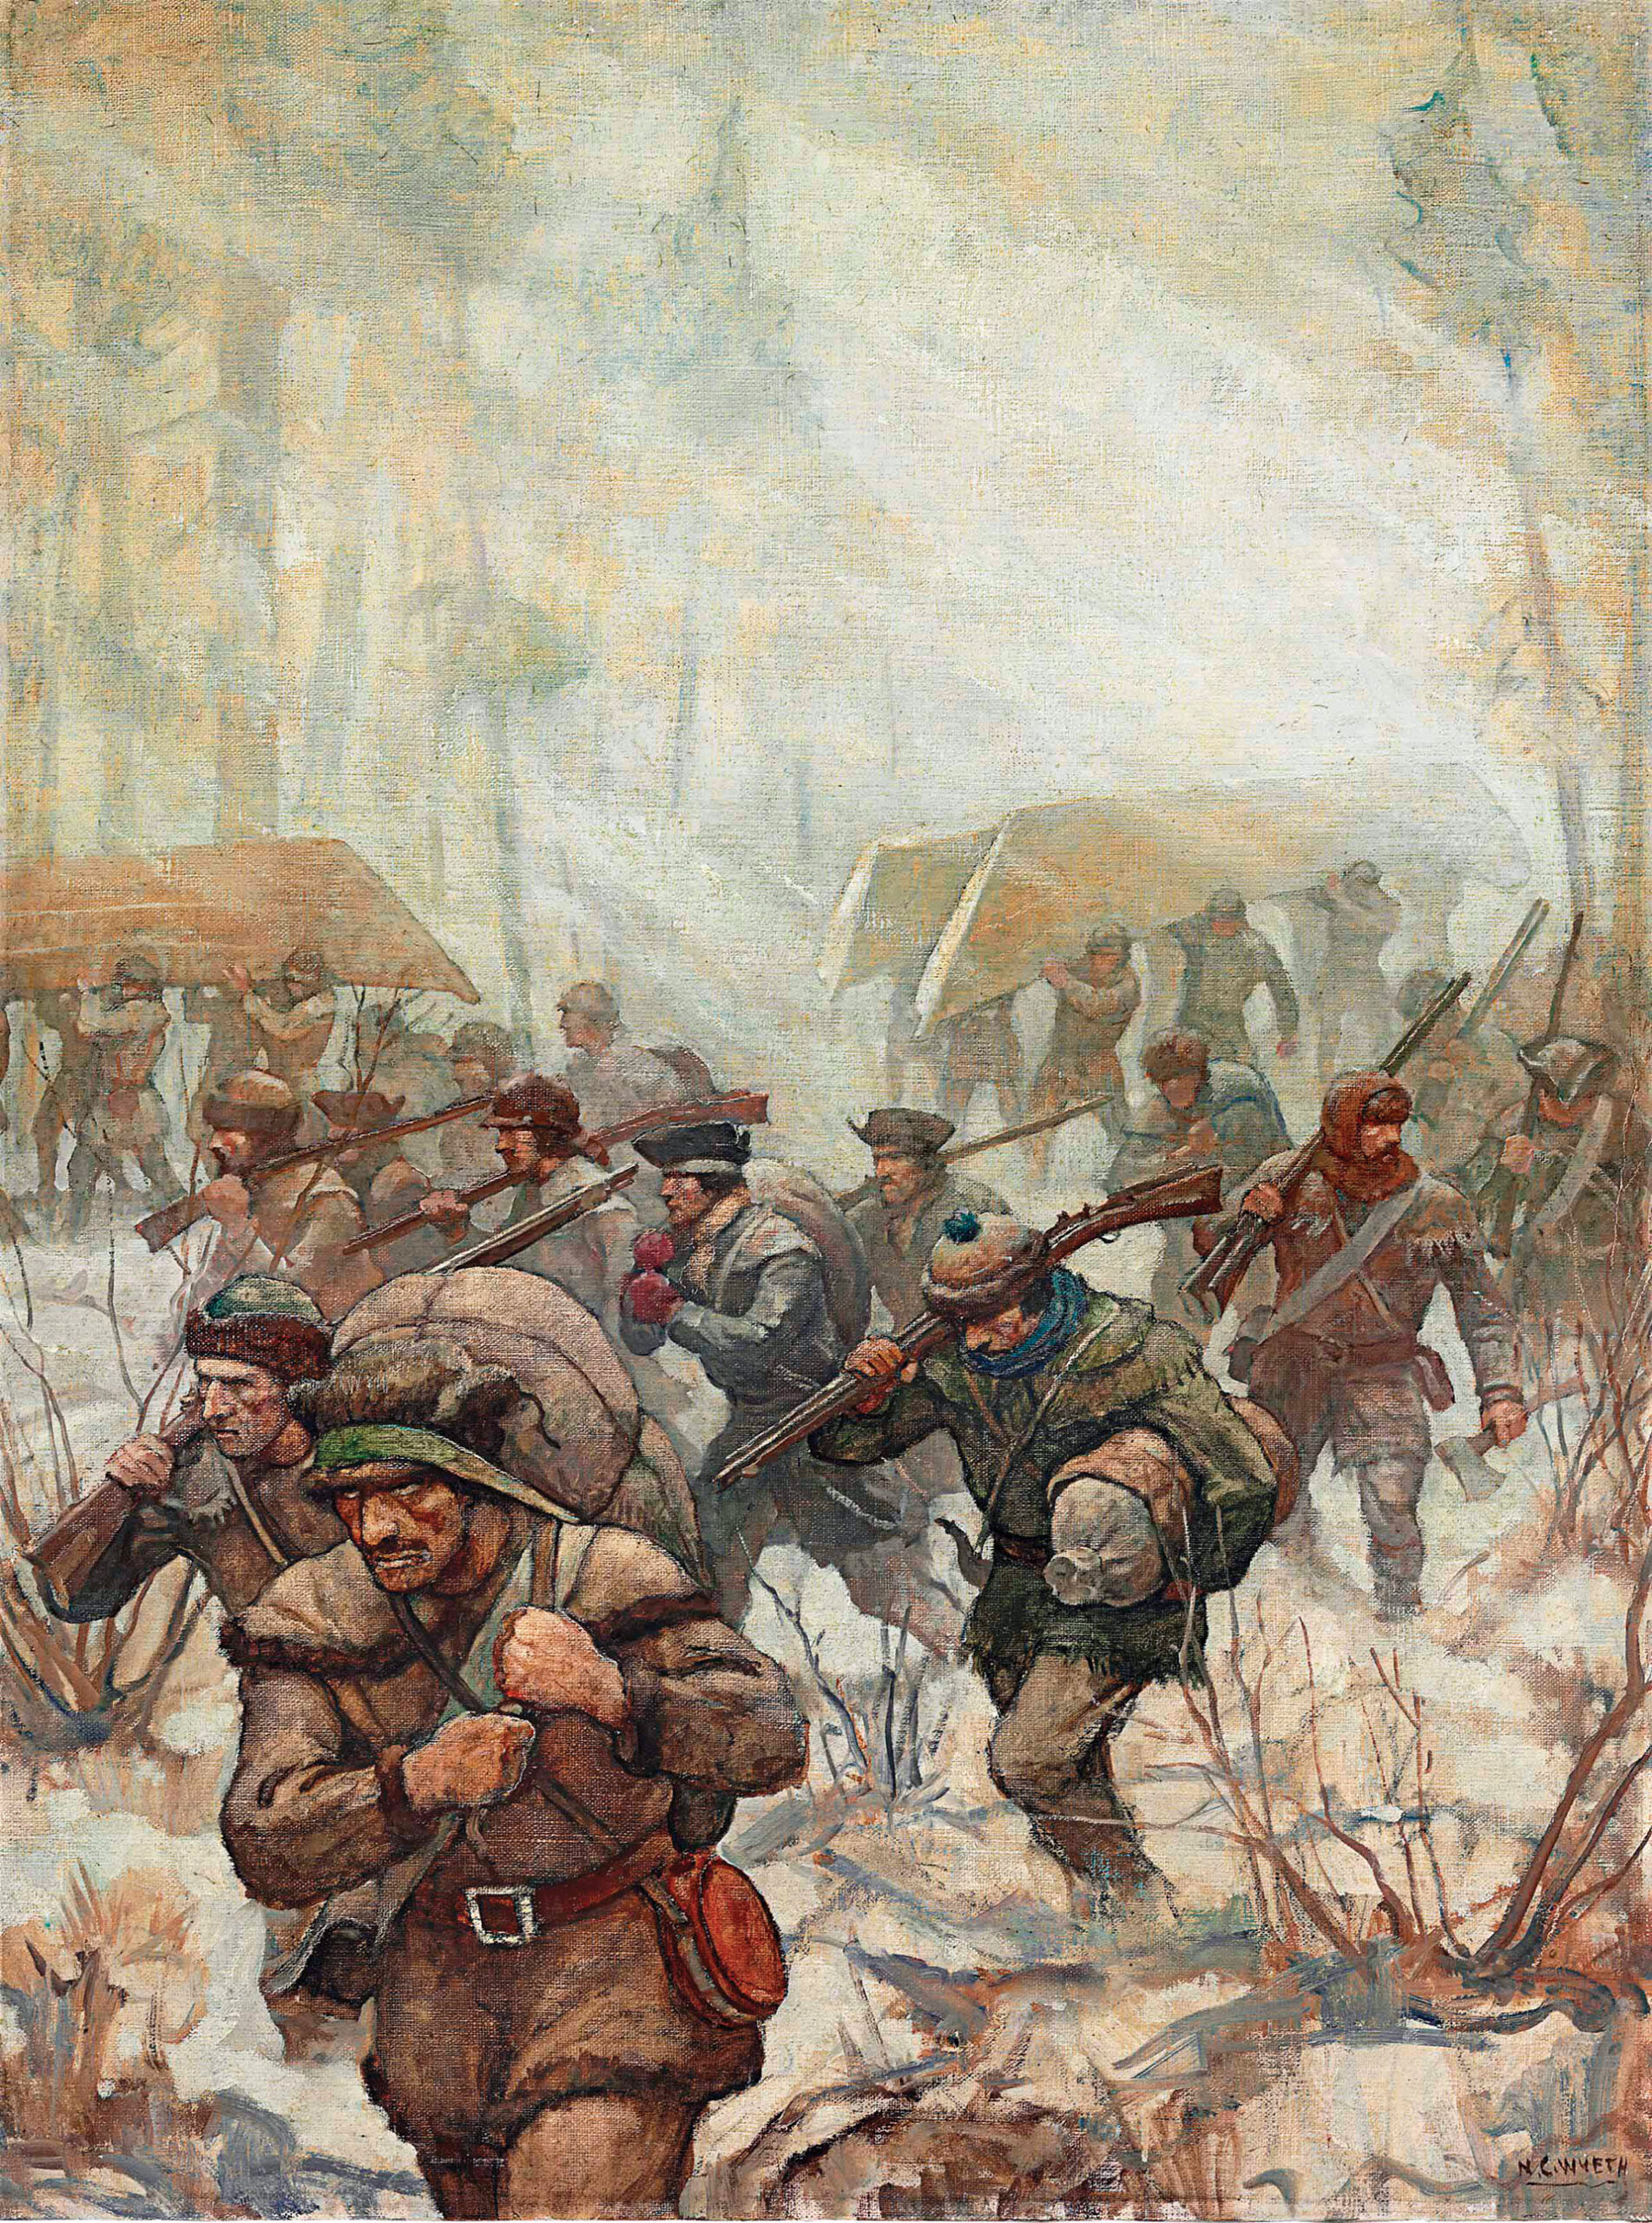 Patriots garbed in hunting shirts and portaging heavy bateaux struggle through the snow-covered wilderness of Northern Maine on their way to besiege Quebec. 